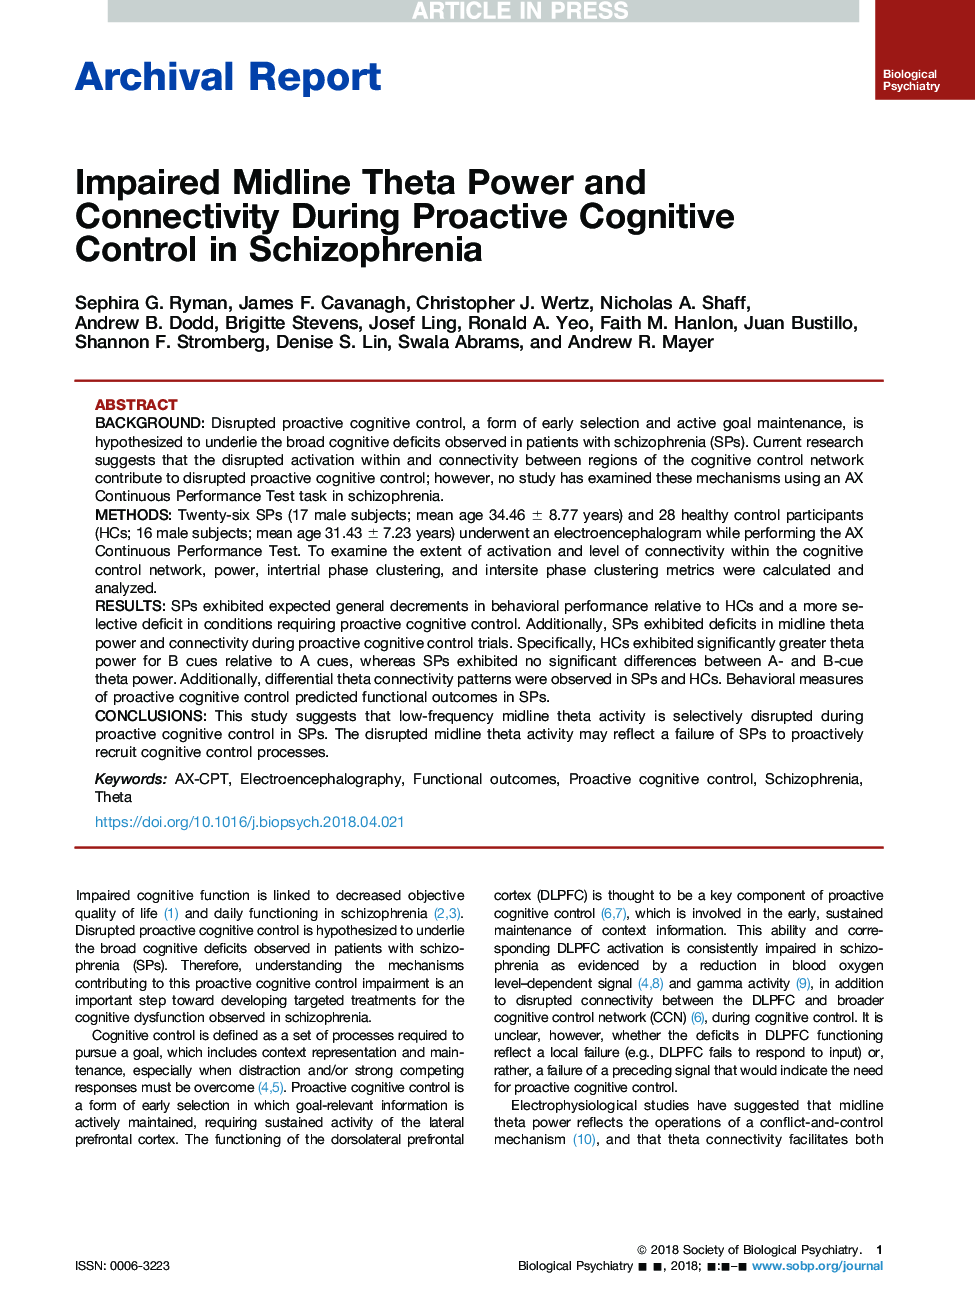 Impaired Midline Theta Power and Connectivity During Proactive Cognitive Control in Schizophrenia